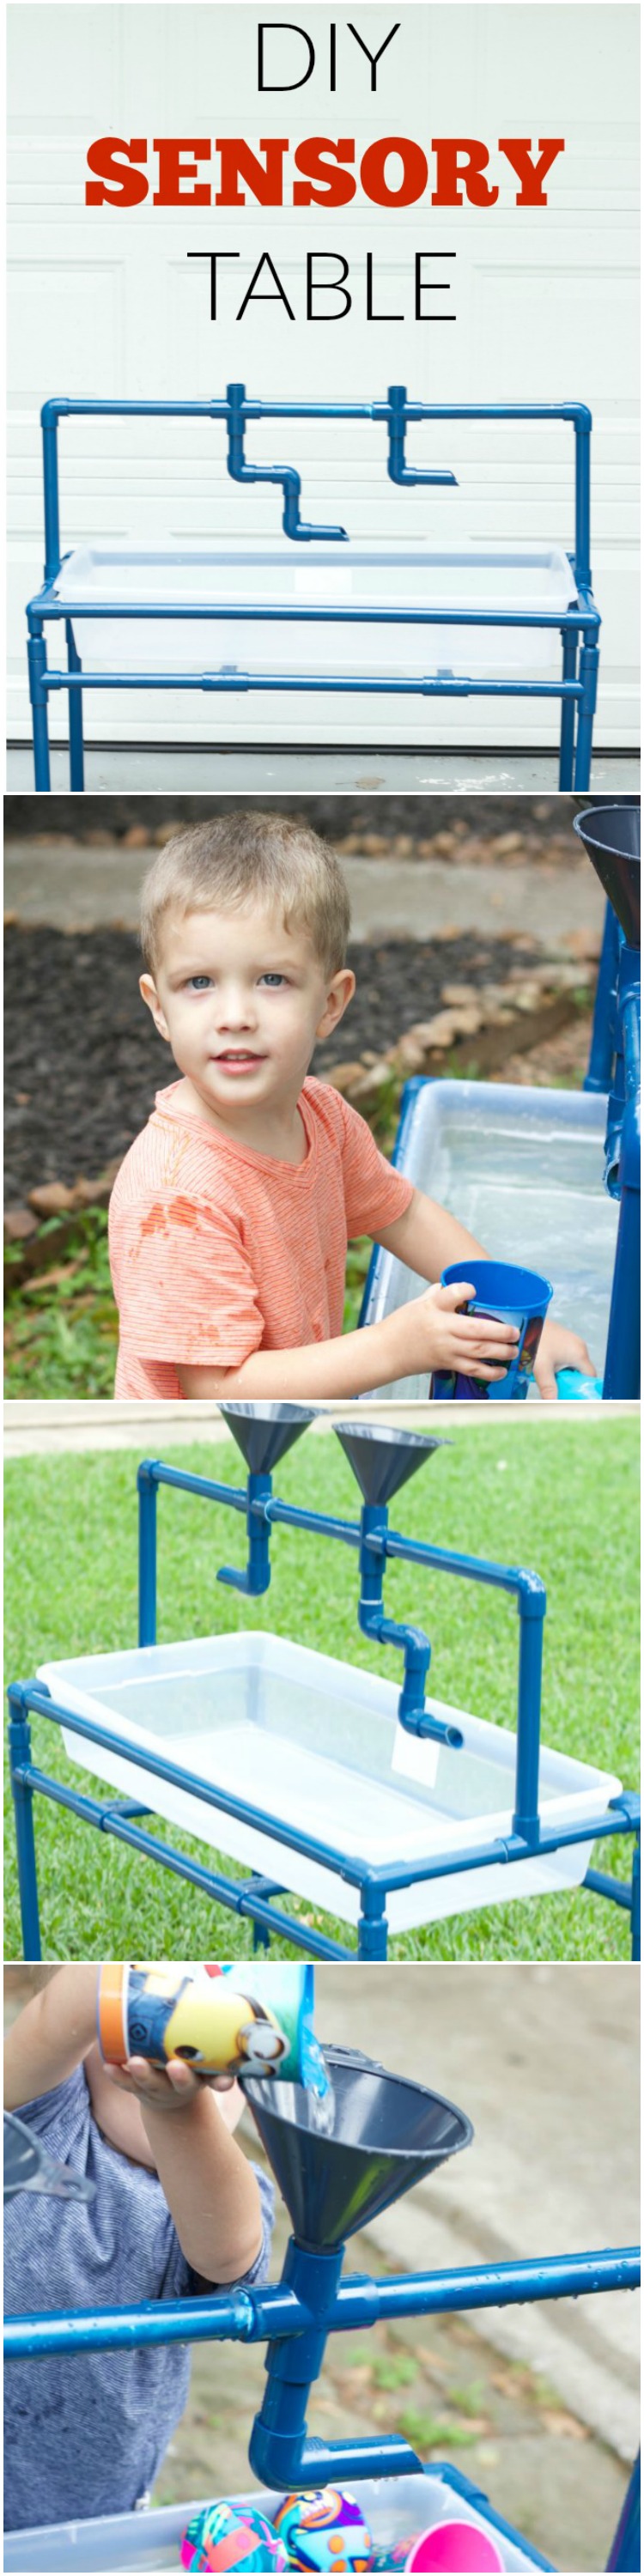 This is so fun! What a fun idea for the summer. This DIY Sensory Table looks so easy to make!